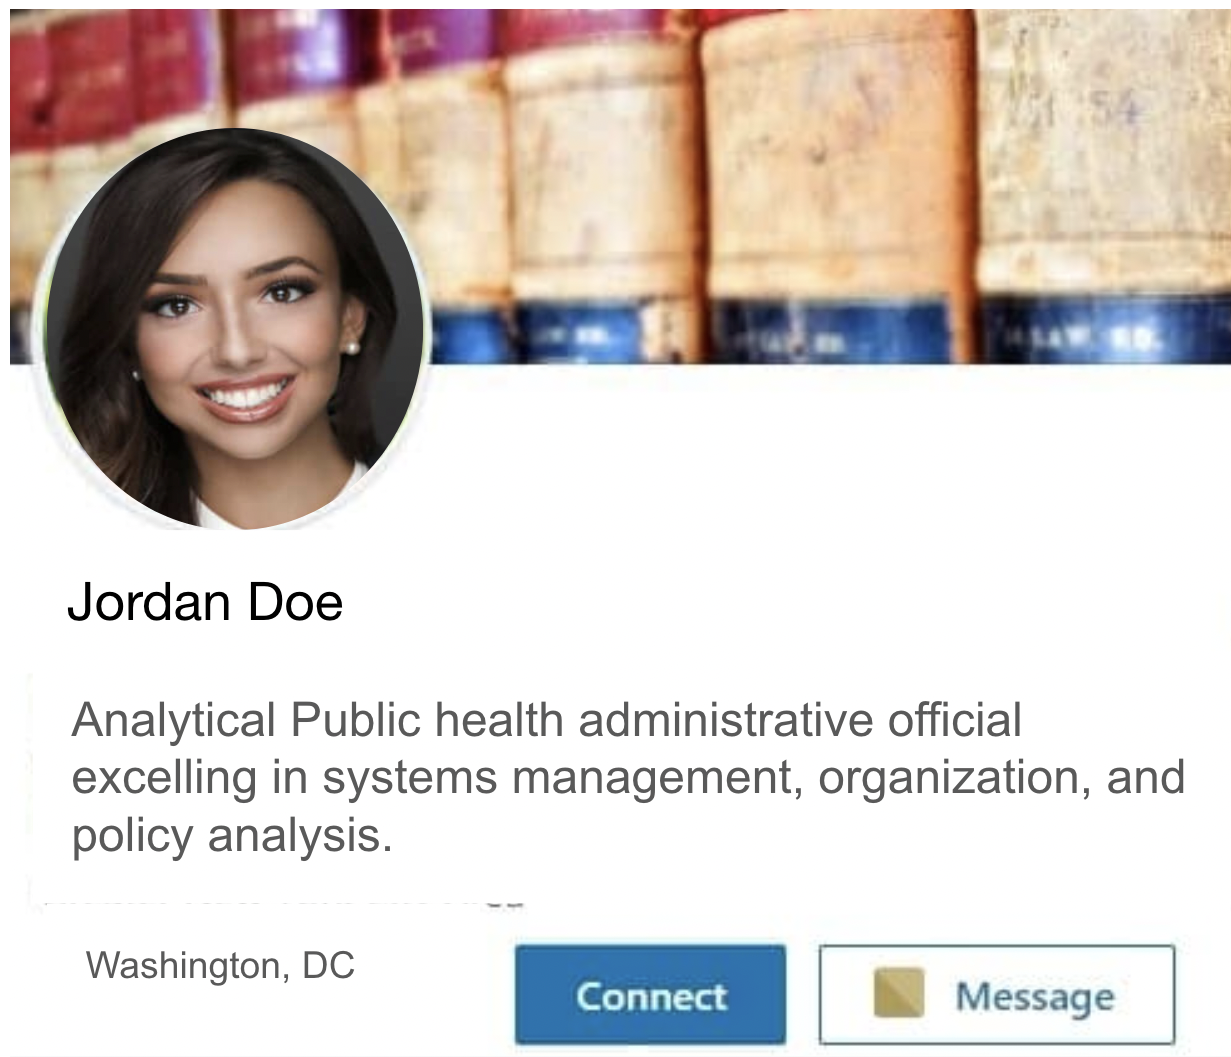 LinkedIn Heading: Analytical Public health administrative official excelling in systems management, organization, and policy analysis. 